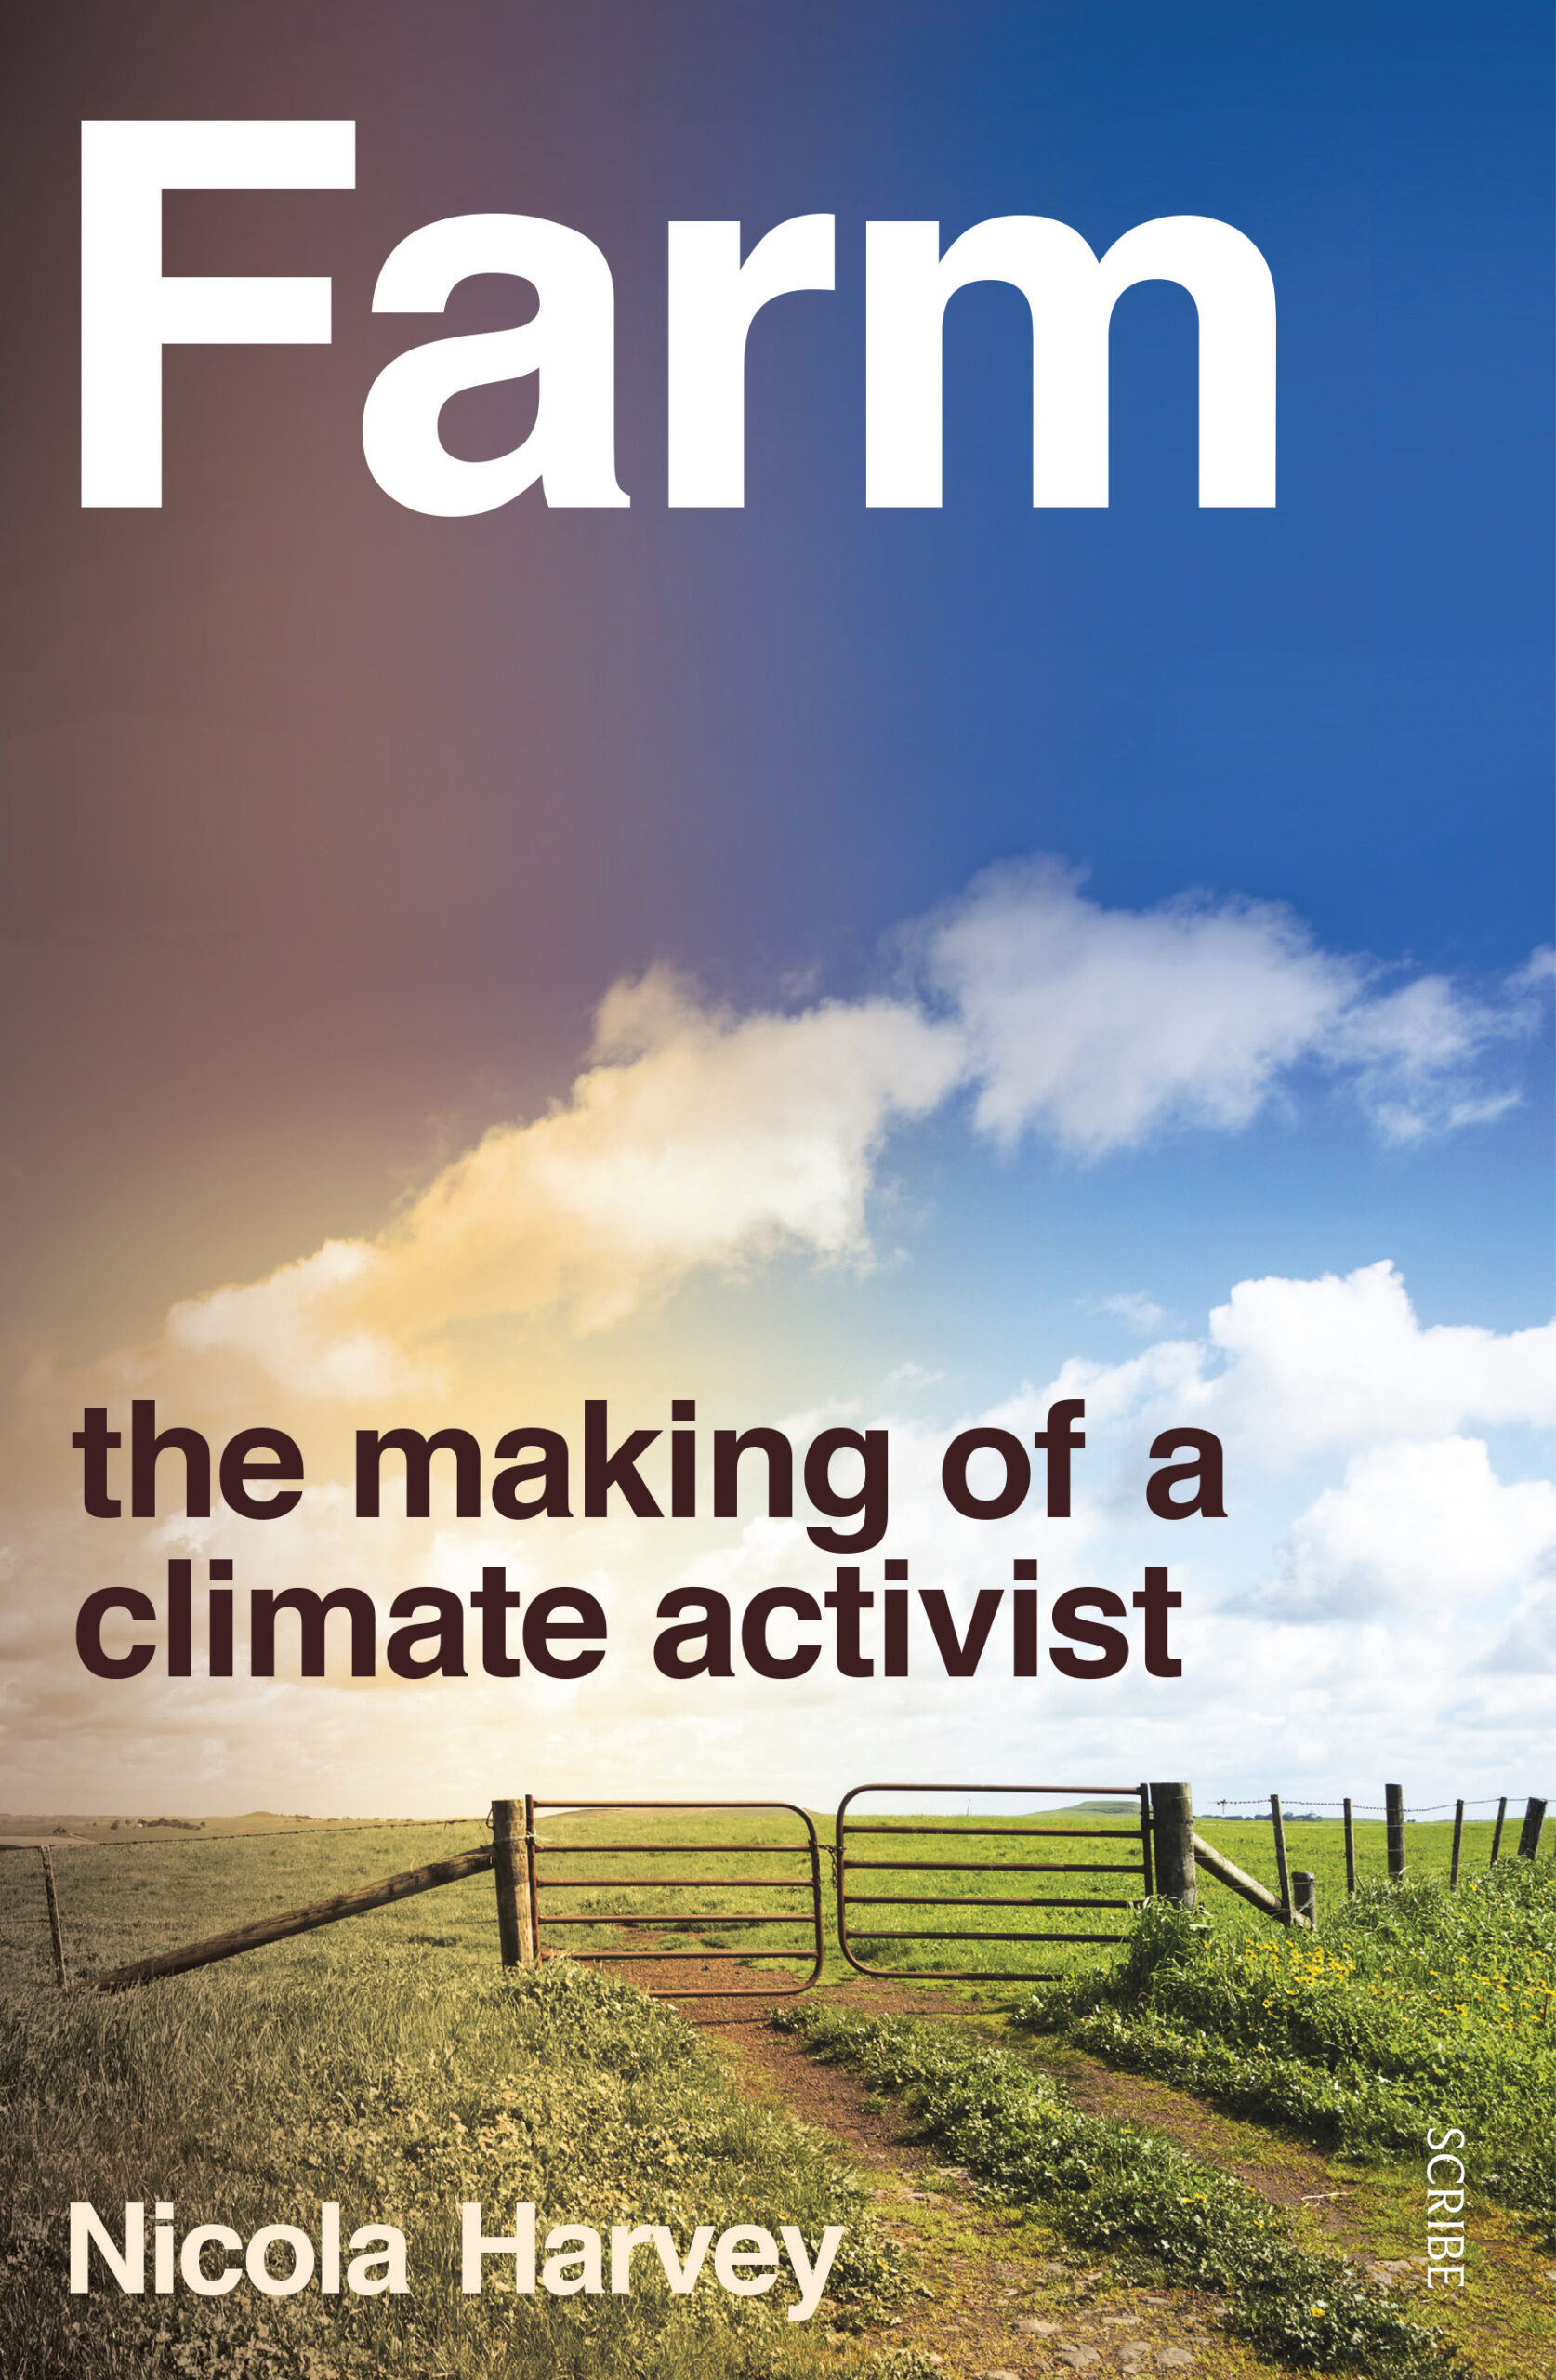 Farm - the making of a climate activist